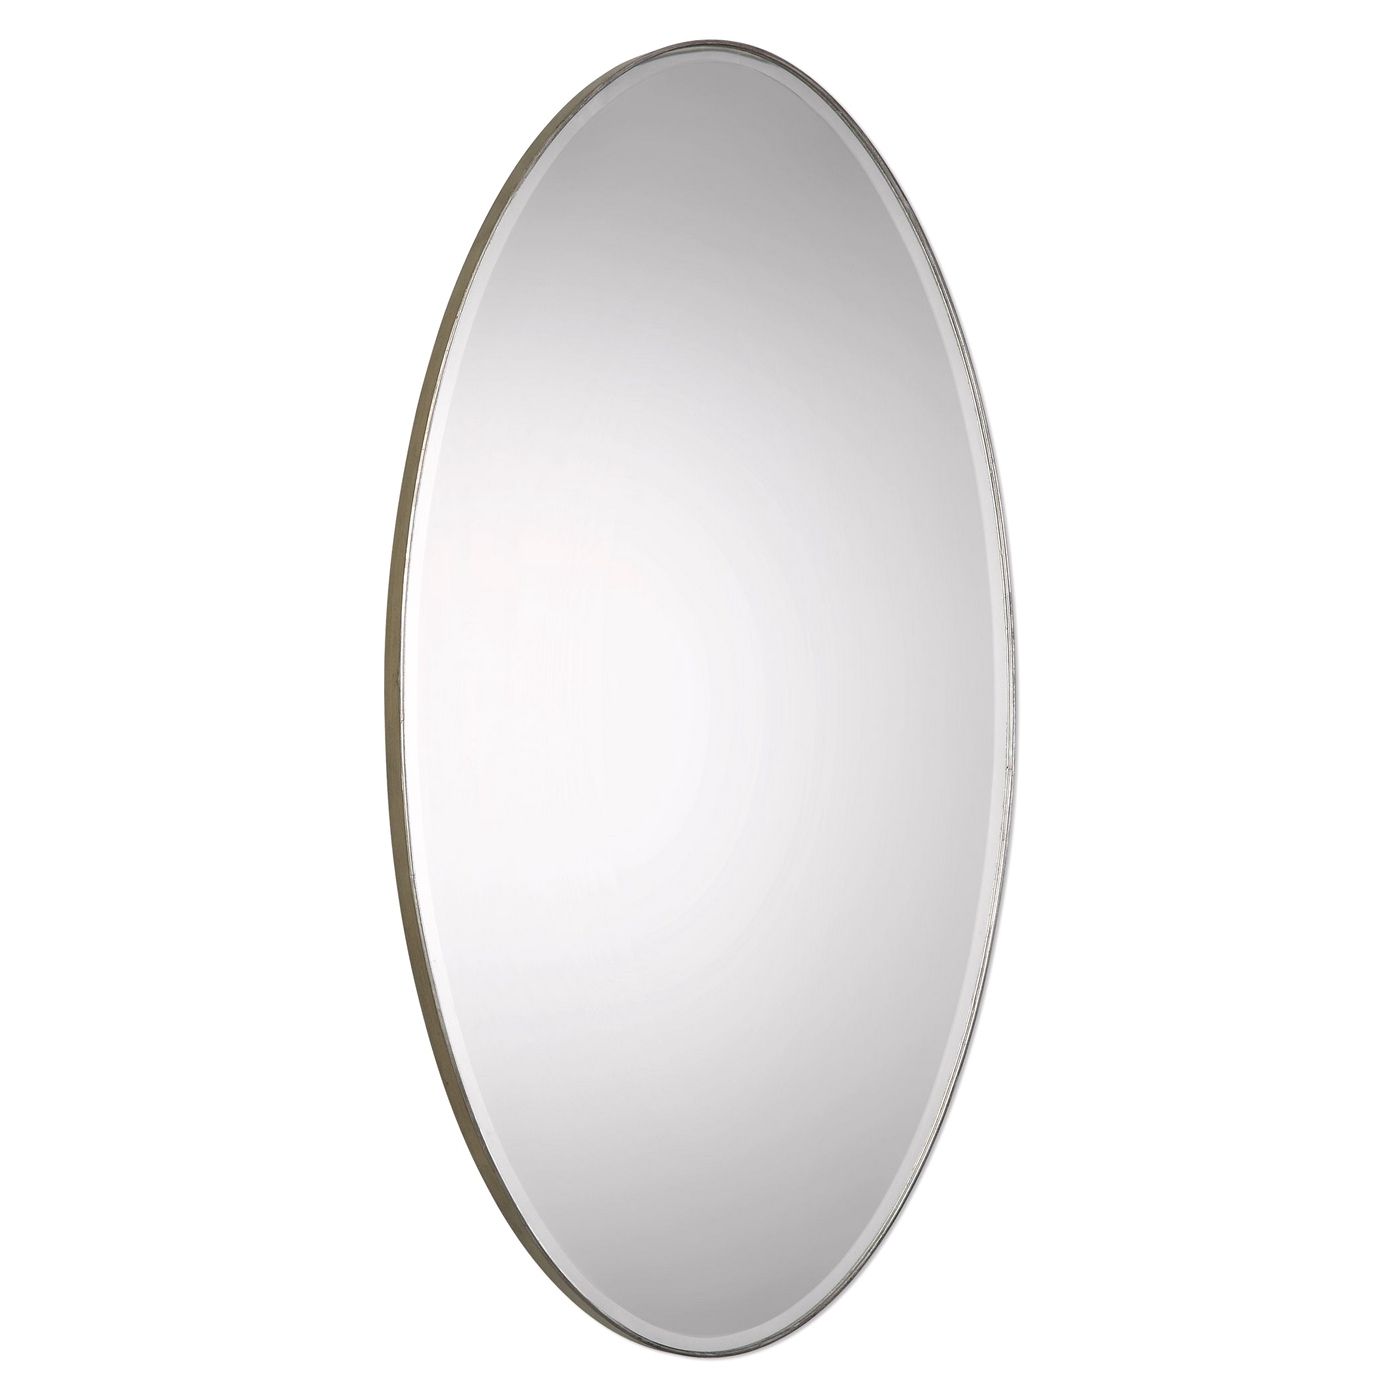 Chic Petra Large Oval Wall Mirror With Iron Frame In Silver Leaf Finish With Regard To 2019 Iron Frame Handcrafted Wall Mirrors (View 14 of 15)